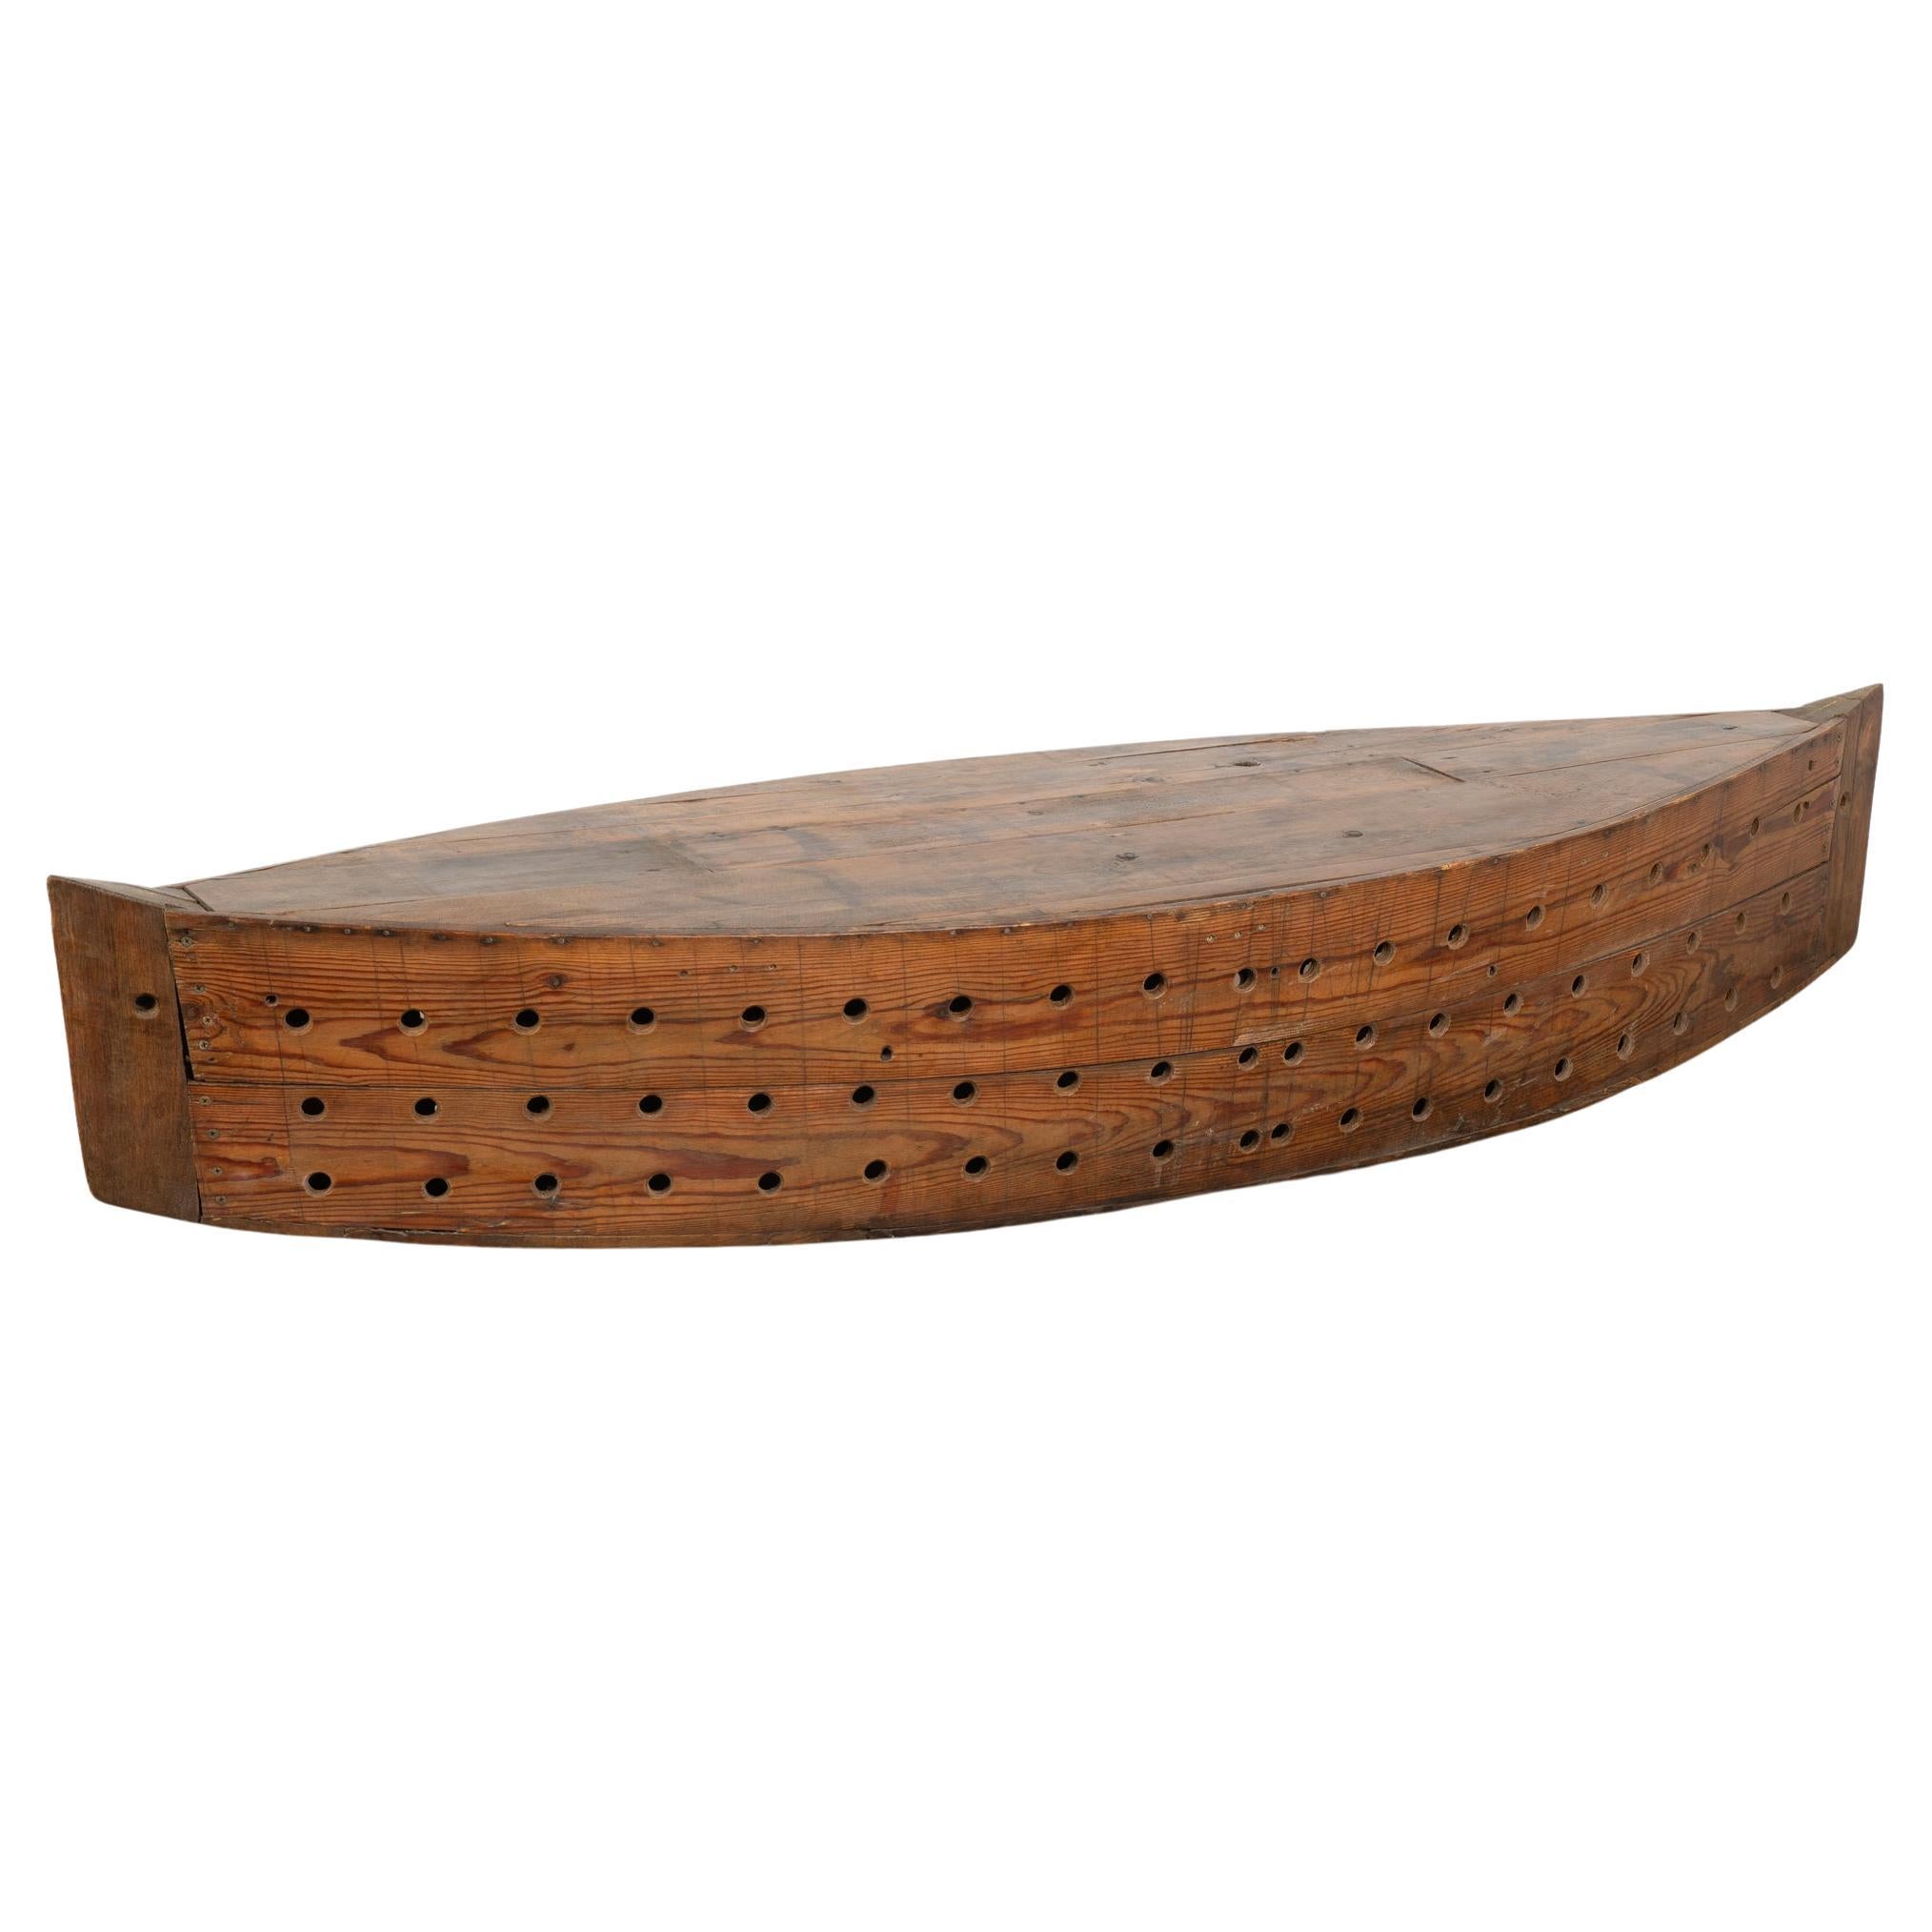 Rustic Decorative Model Boat With Holes For Fishing or Large Creel, circa 1940 For Sale